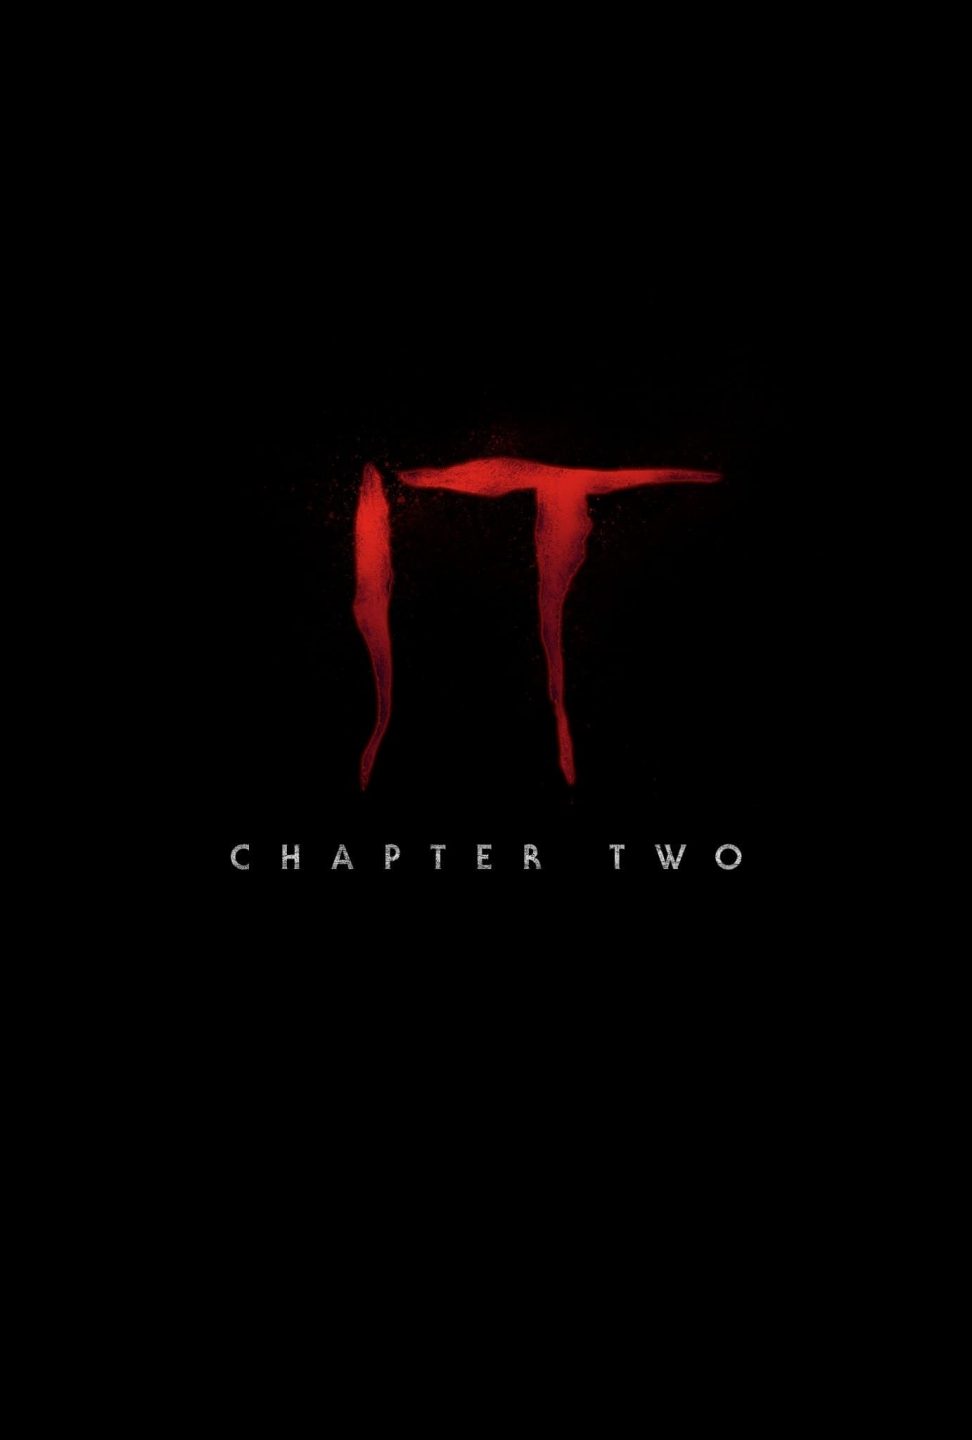 Poster for the movie "It: Chapter Two"